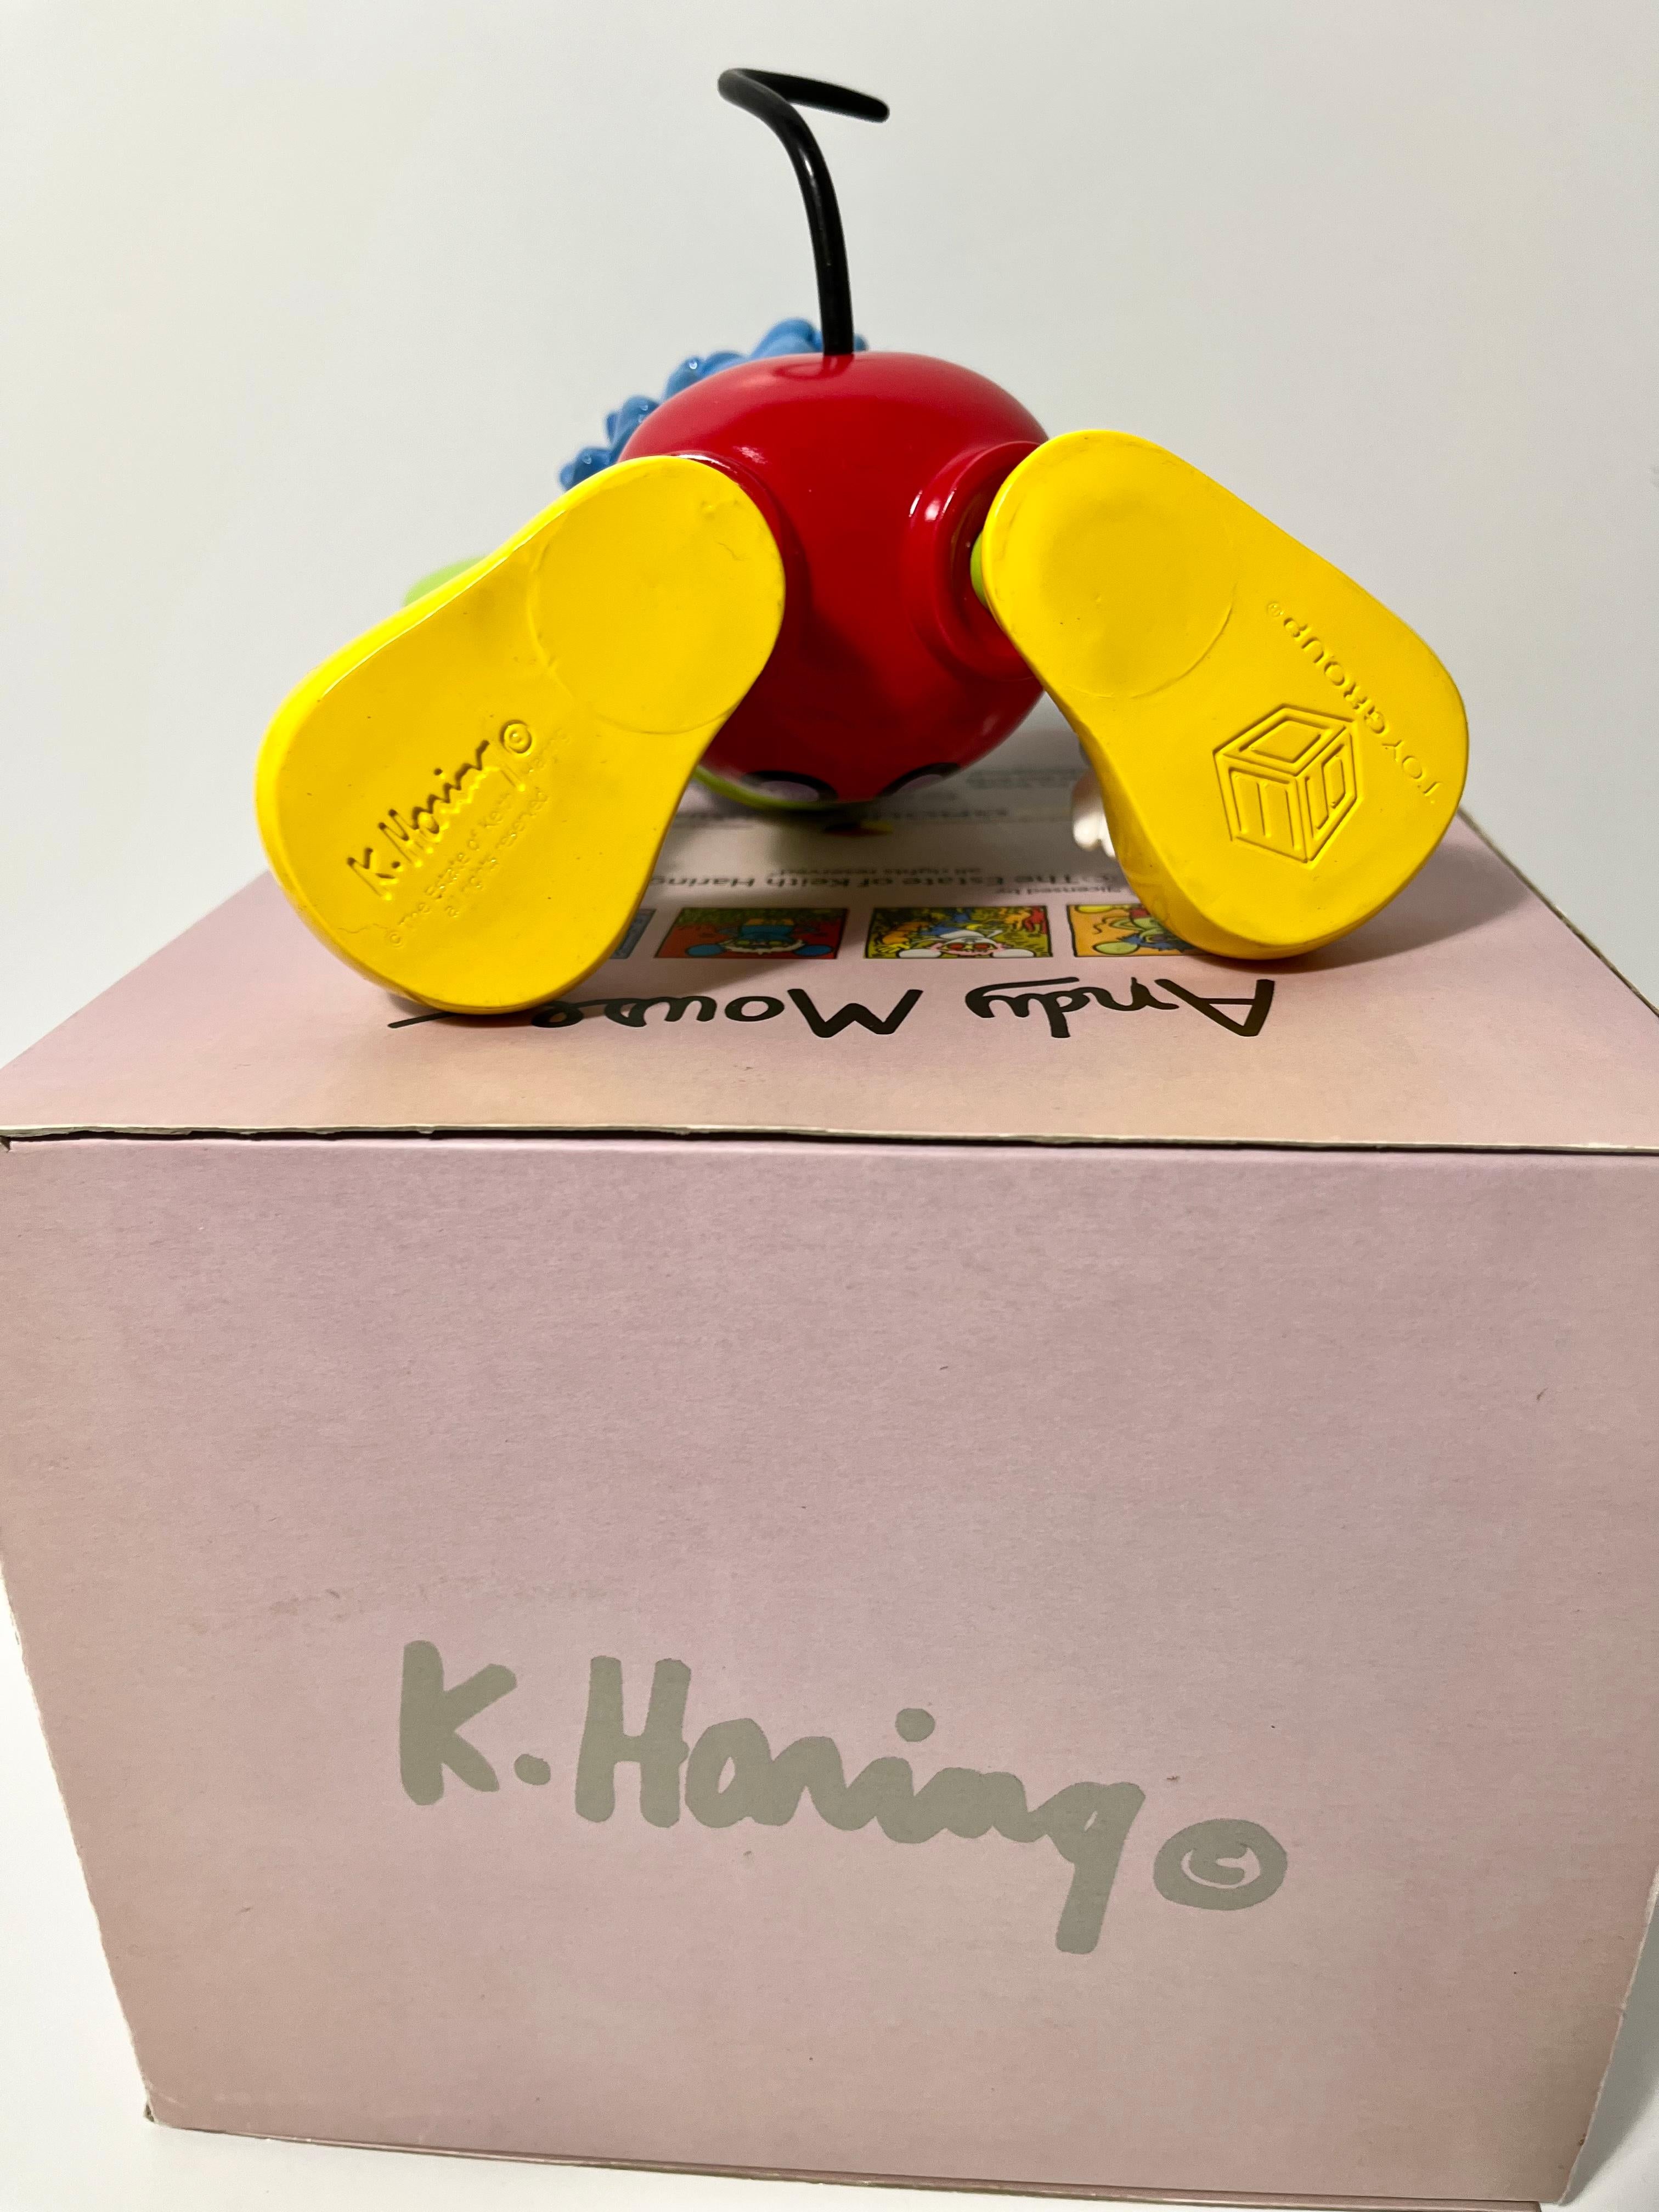 Keith Haring Andy Mouse art toy:
This rare vintage, limited edition Keith Haring Andy Mouse art toy was published in 2005 & is licensed by the Estate of Keith Haring. The collectible reveals Keith Haring's 'Andy Mouse' artwork from the mid 1980s and